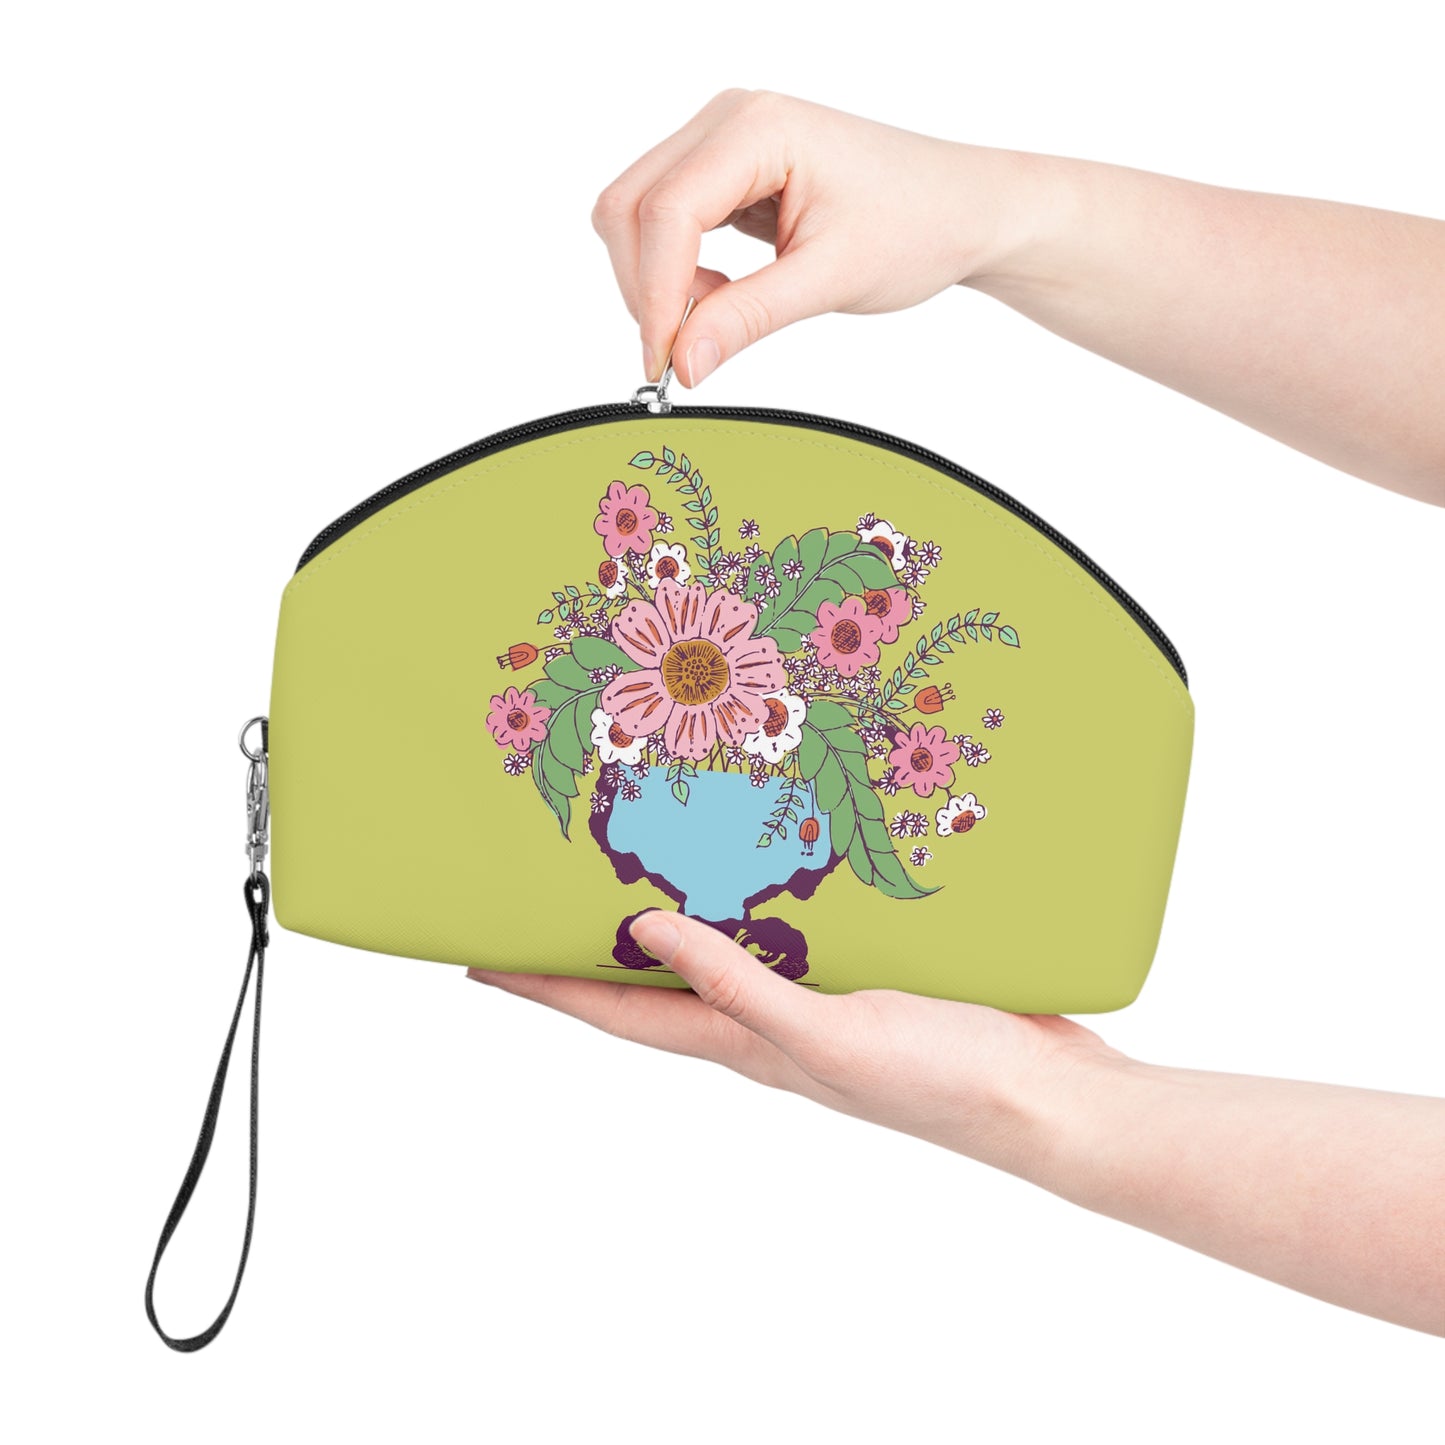 Cheerful Watercolor Flowers in Vase on Bright Green Makeup Bag